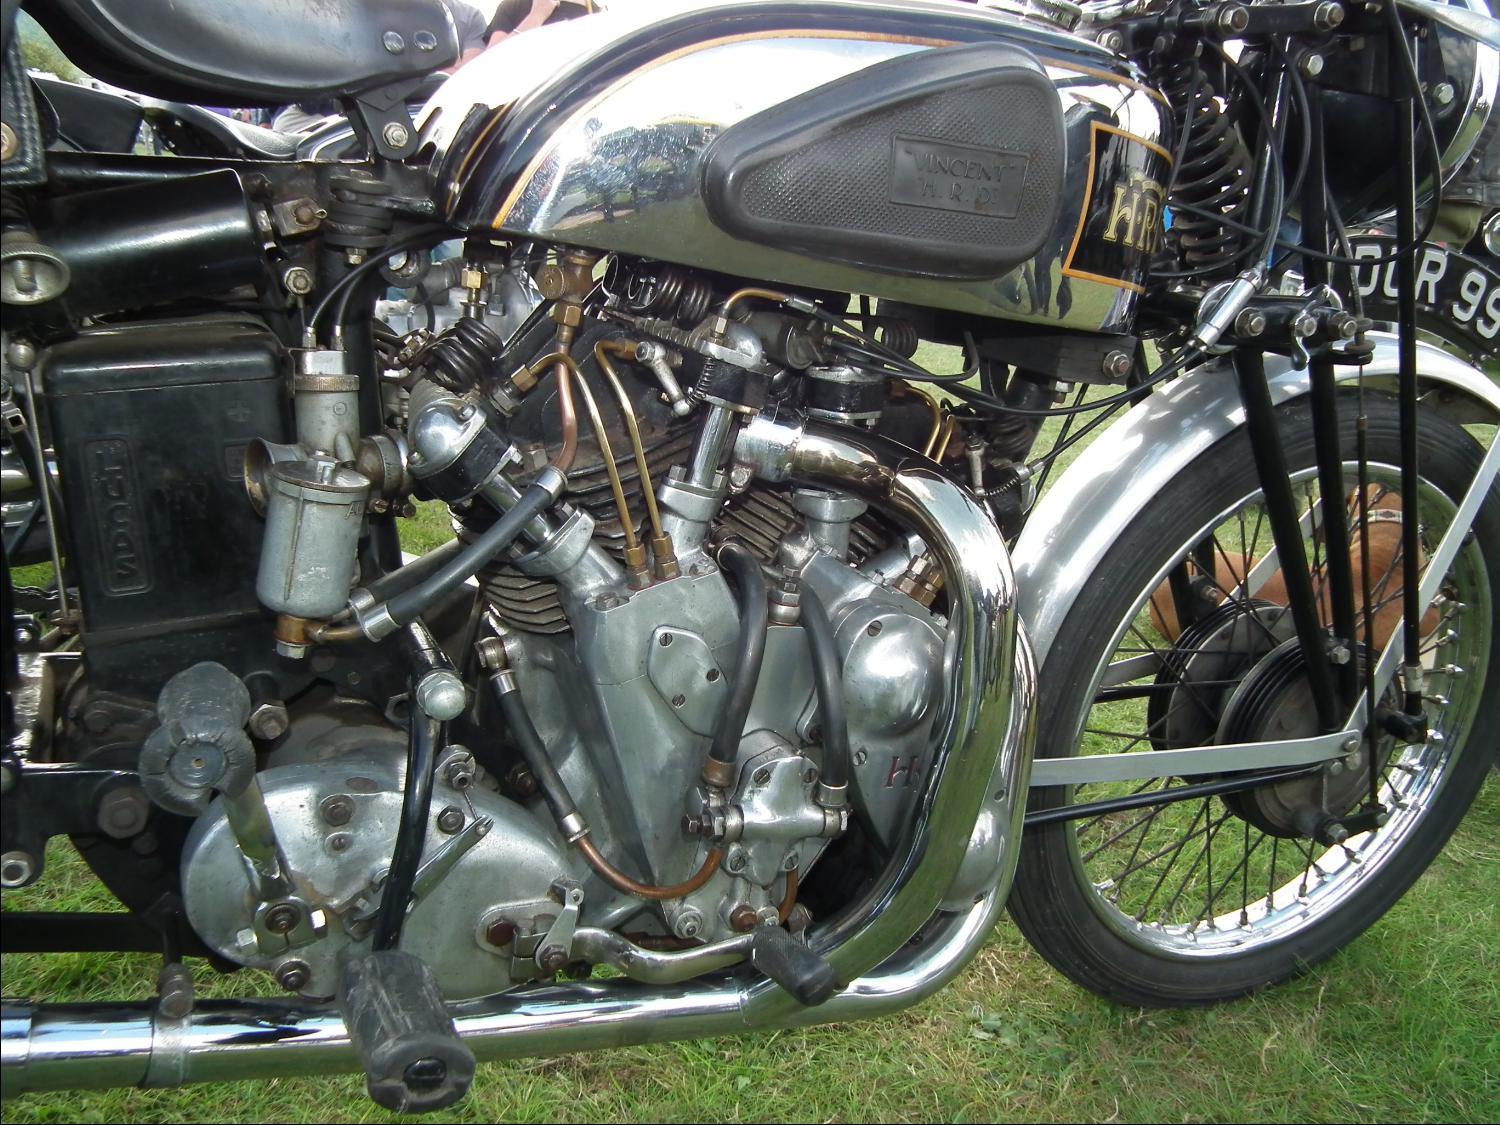 an old fashion motorcycle is displayed on the grass